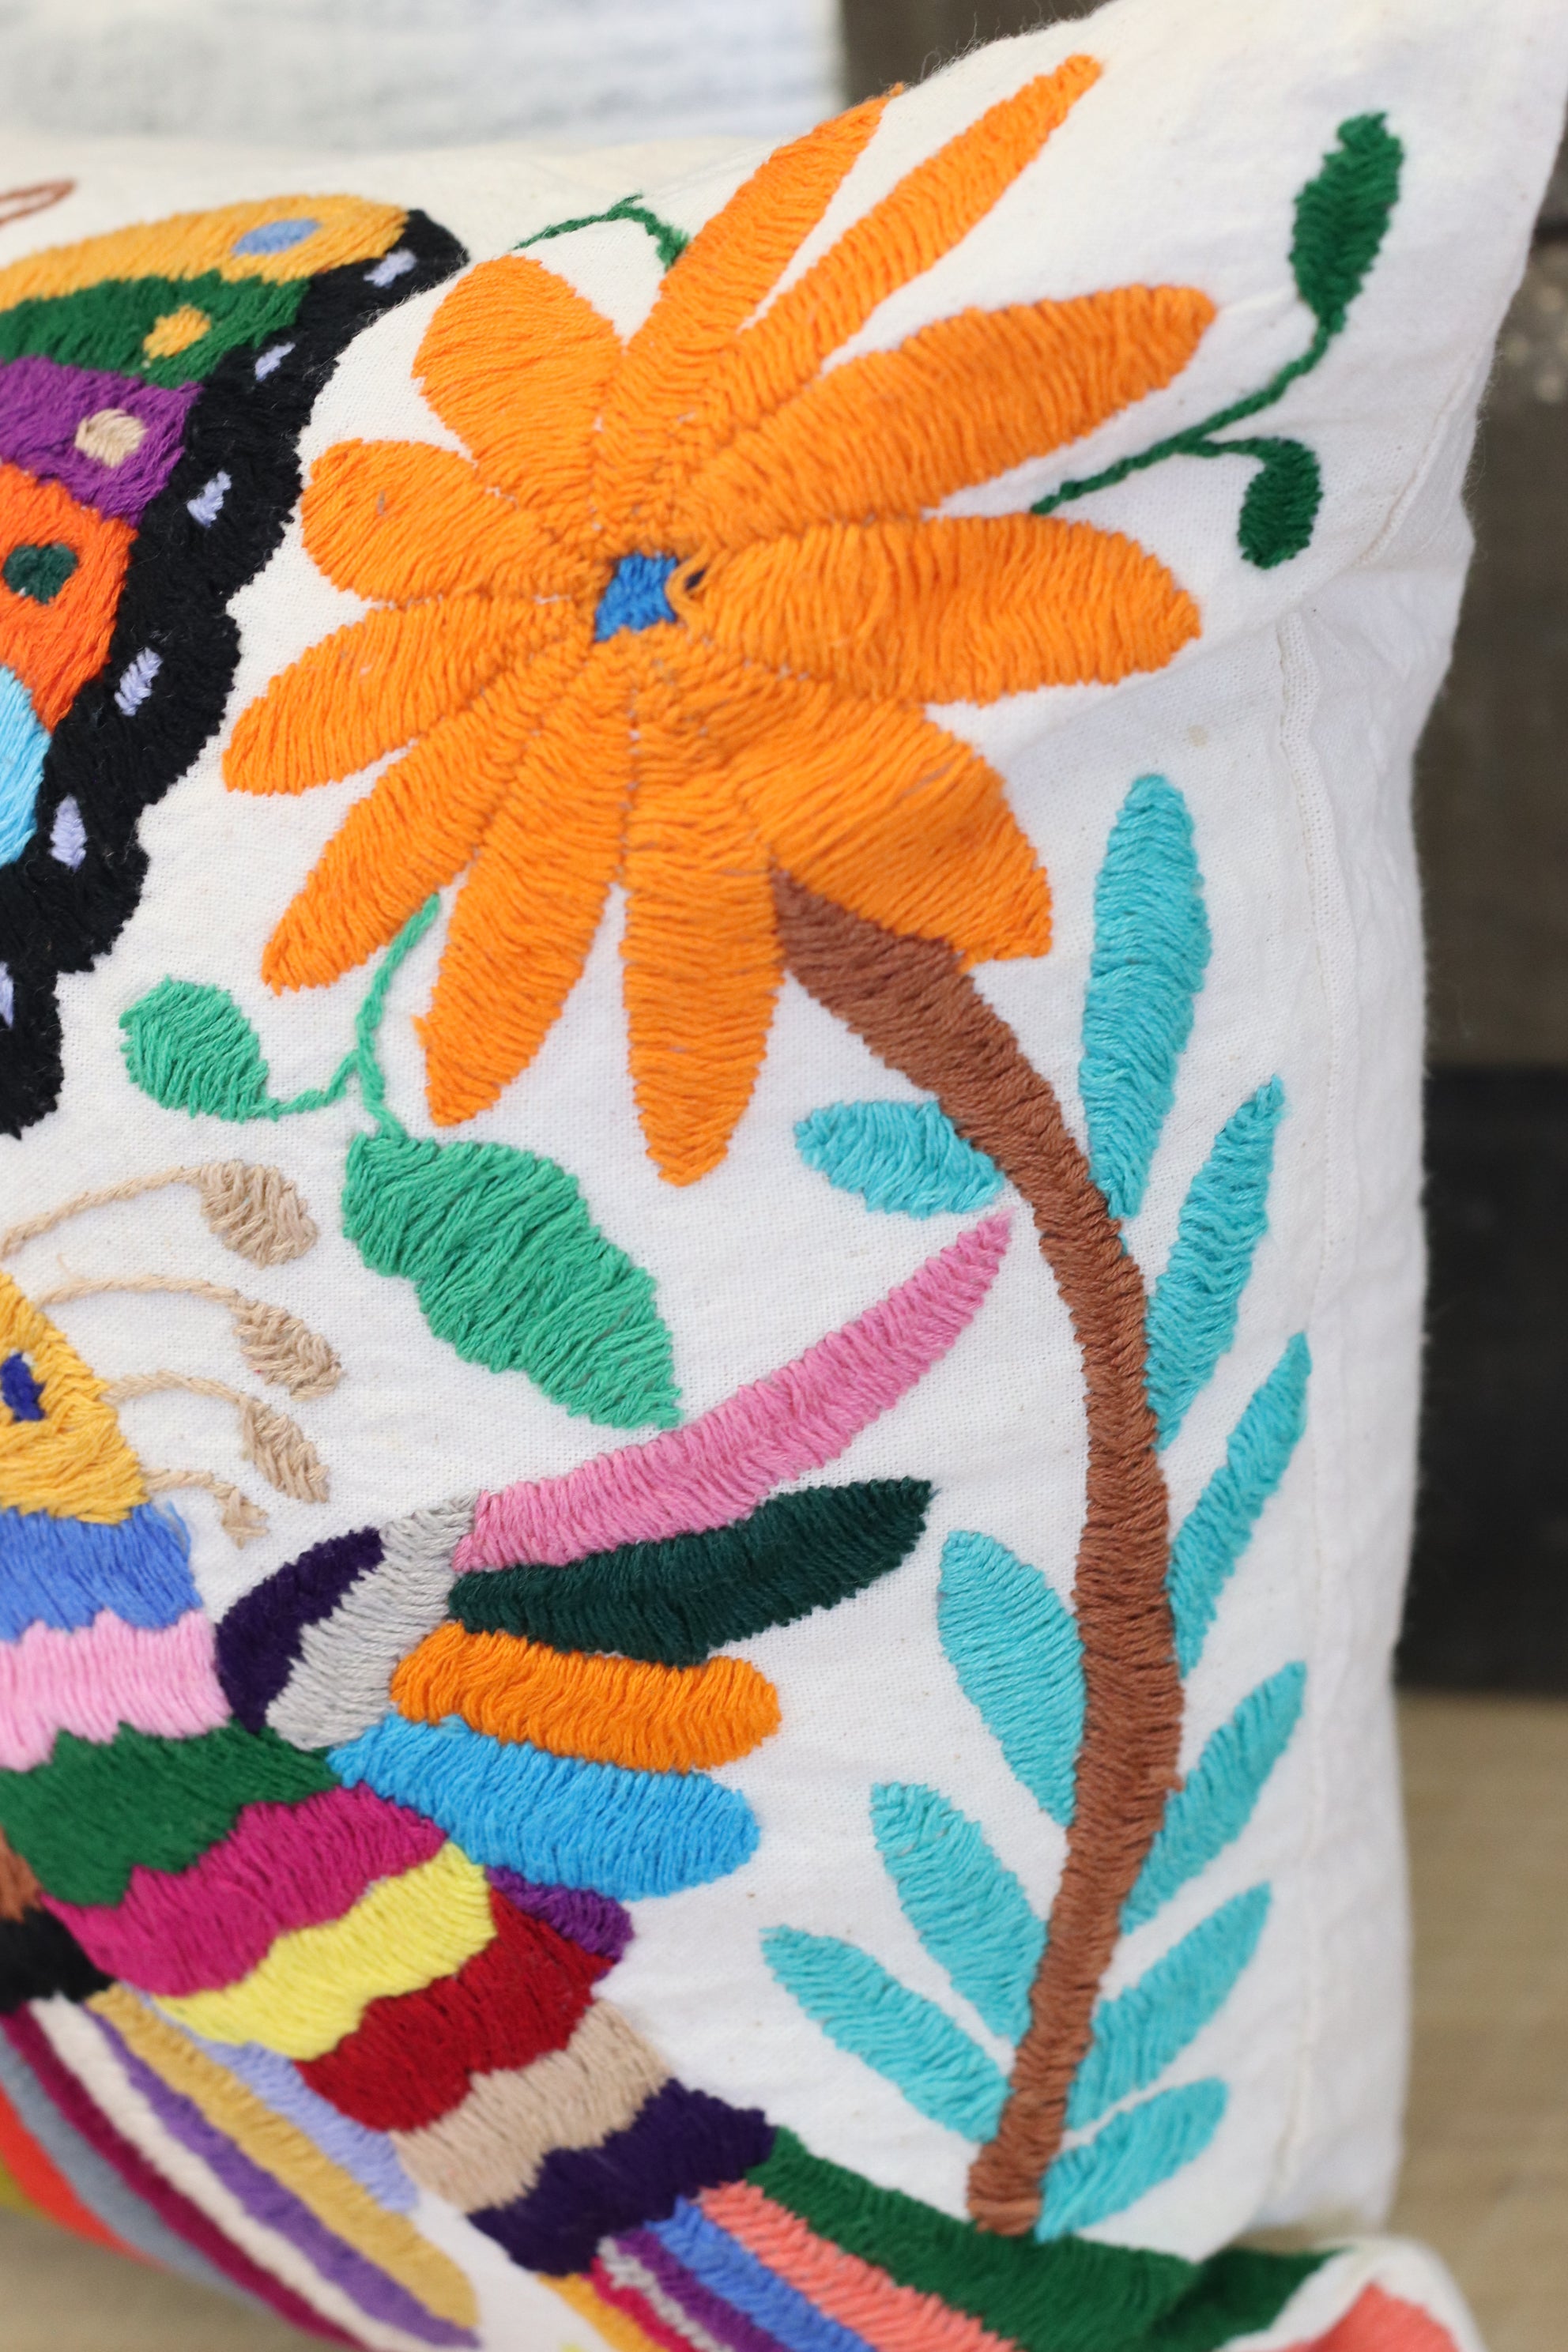 Rectangle Otomi Tenango Pillow Cover with Hand Embroidered Butterfly, Bird and Flower Design in Vibrant Colors. Handmade in Mexico. Ships from the USA. Buy now at www.felipeandgrace.com.